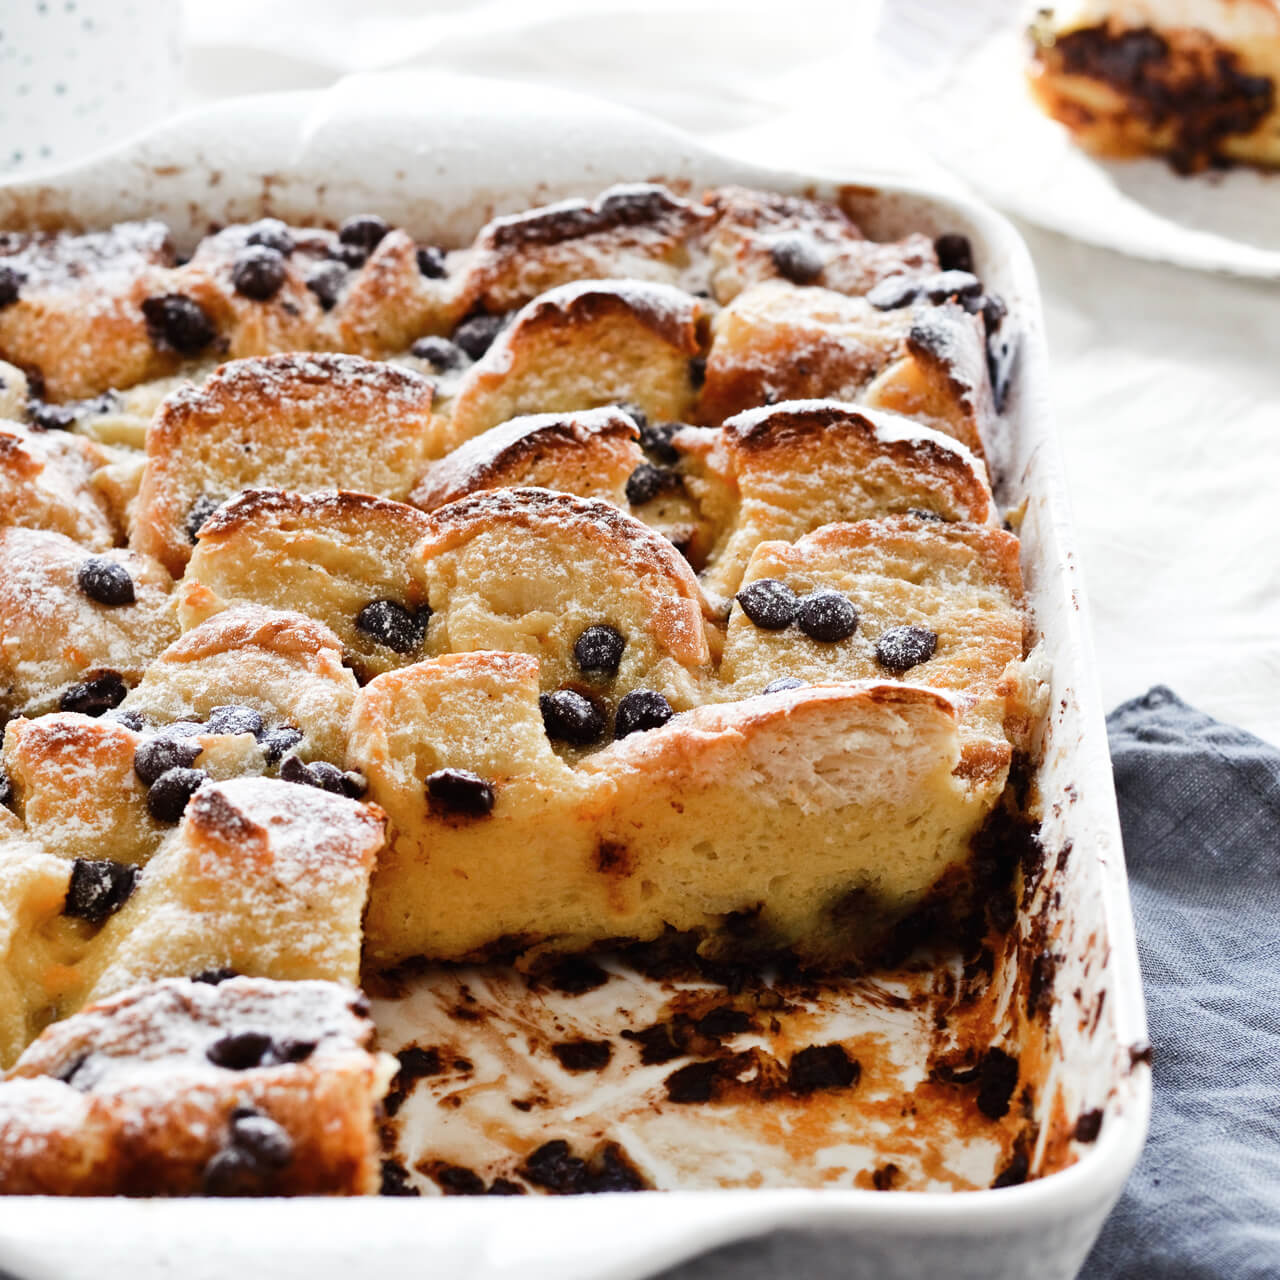 Easy to make orange chocolate chip bread pudding, made with challah and topped with whipped cream. Perfect brunch or dessert!